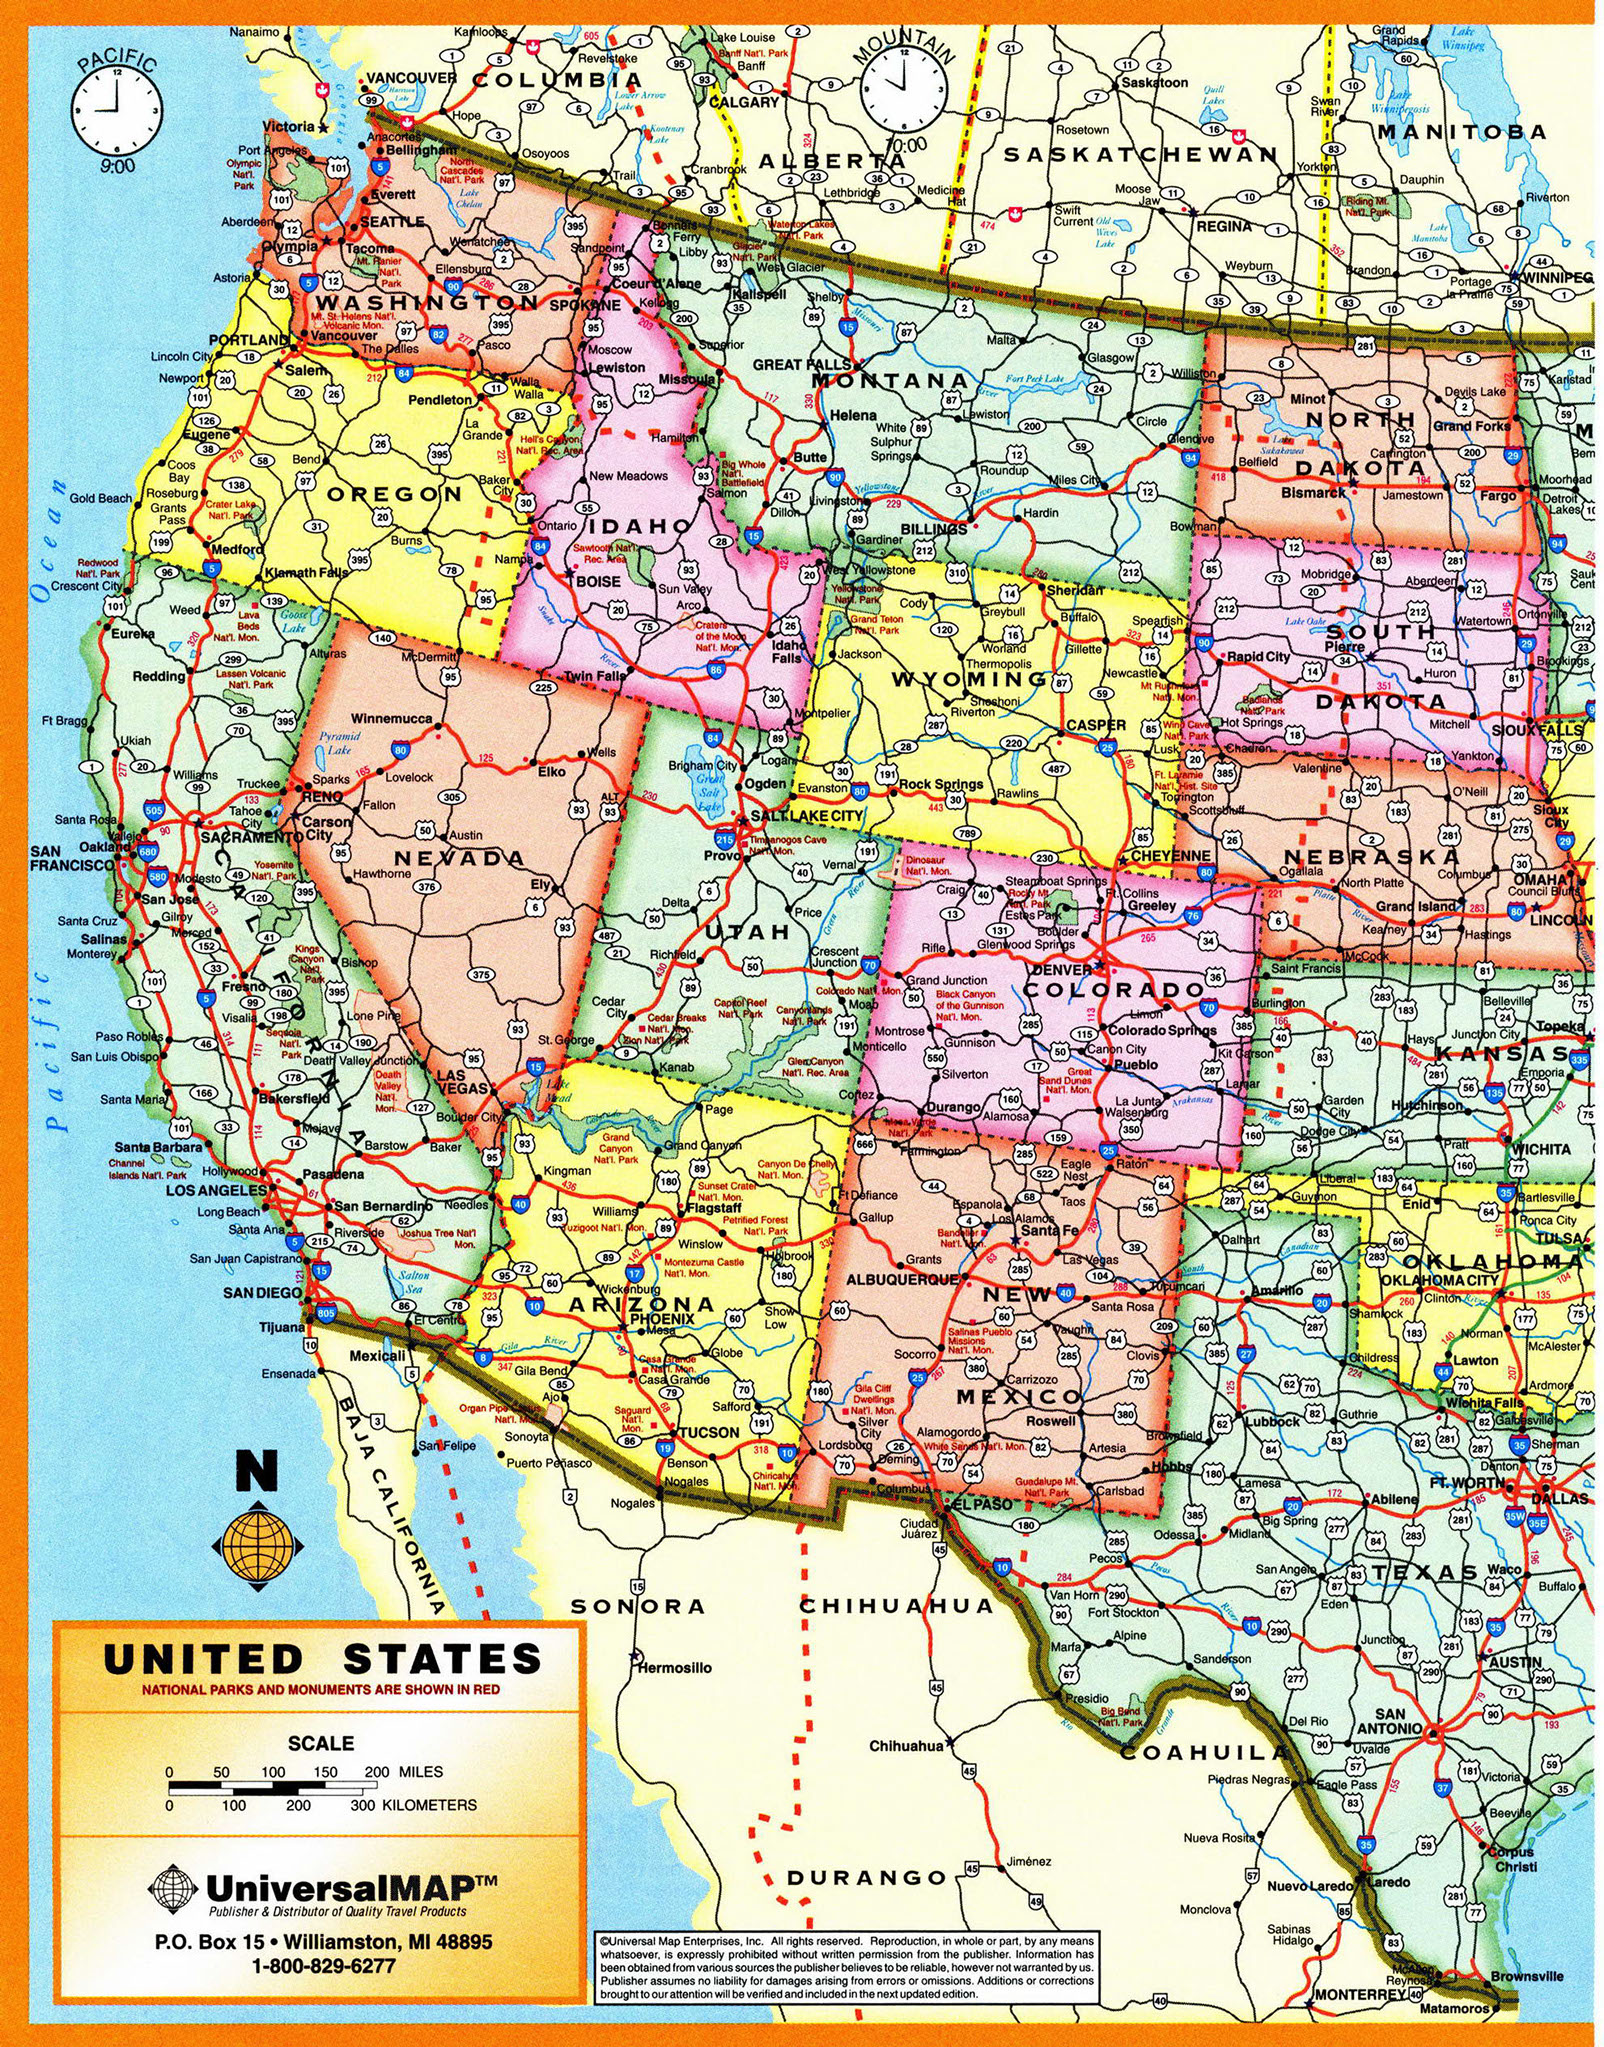 Time zone US map - Pacific coast